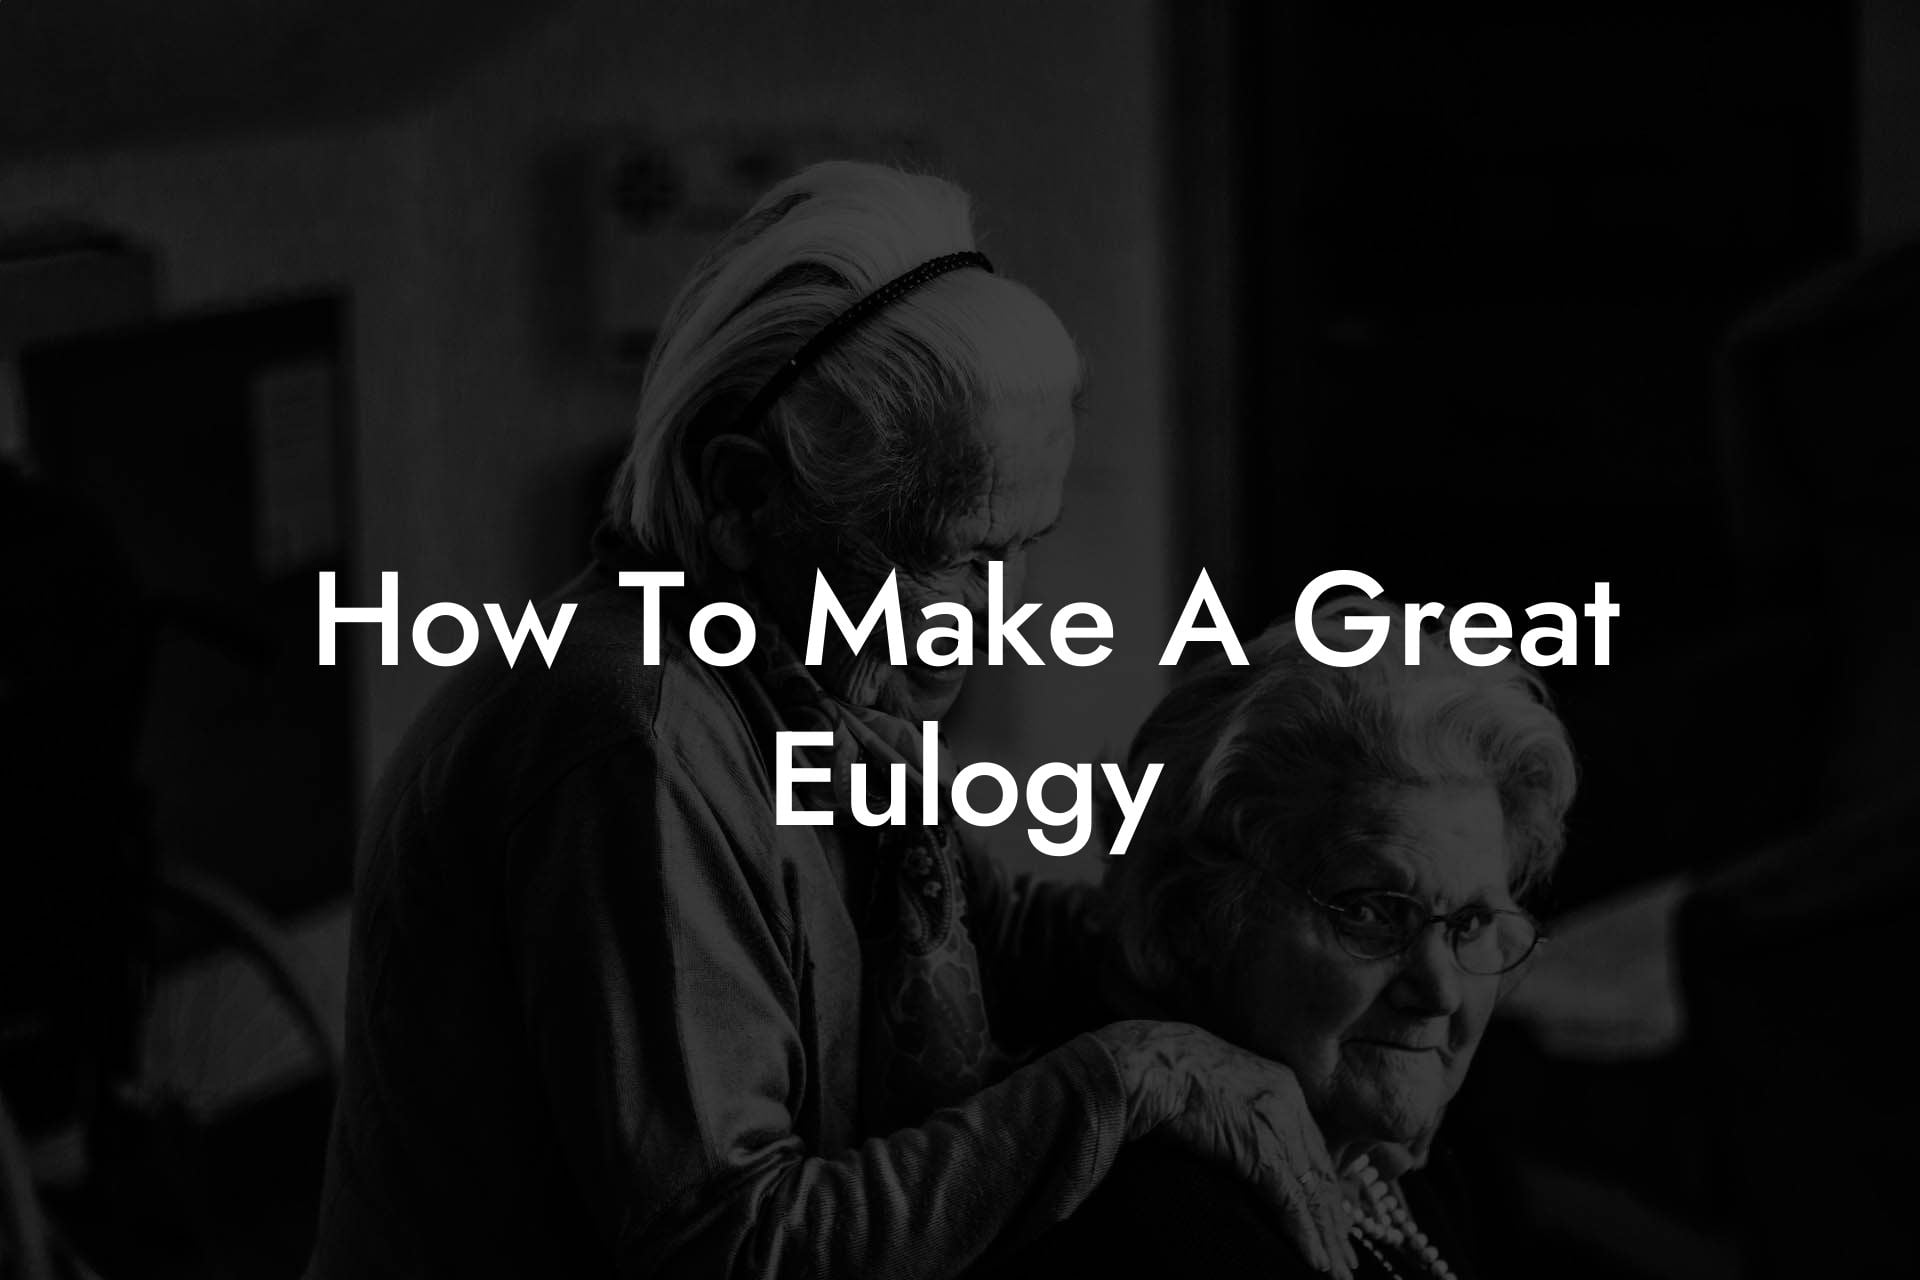 How To Make A Great Eulogy